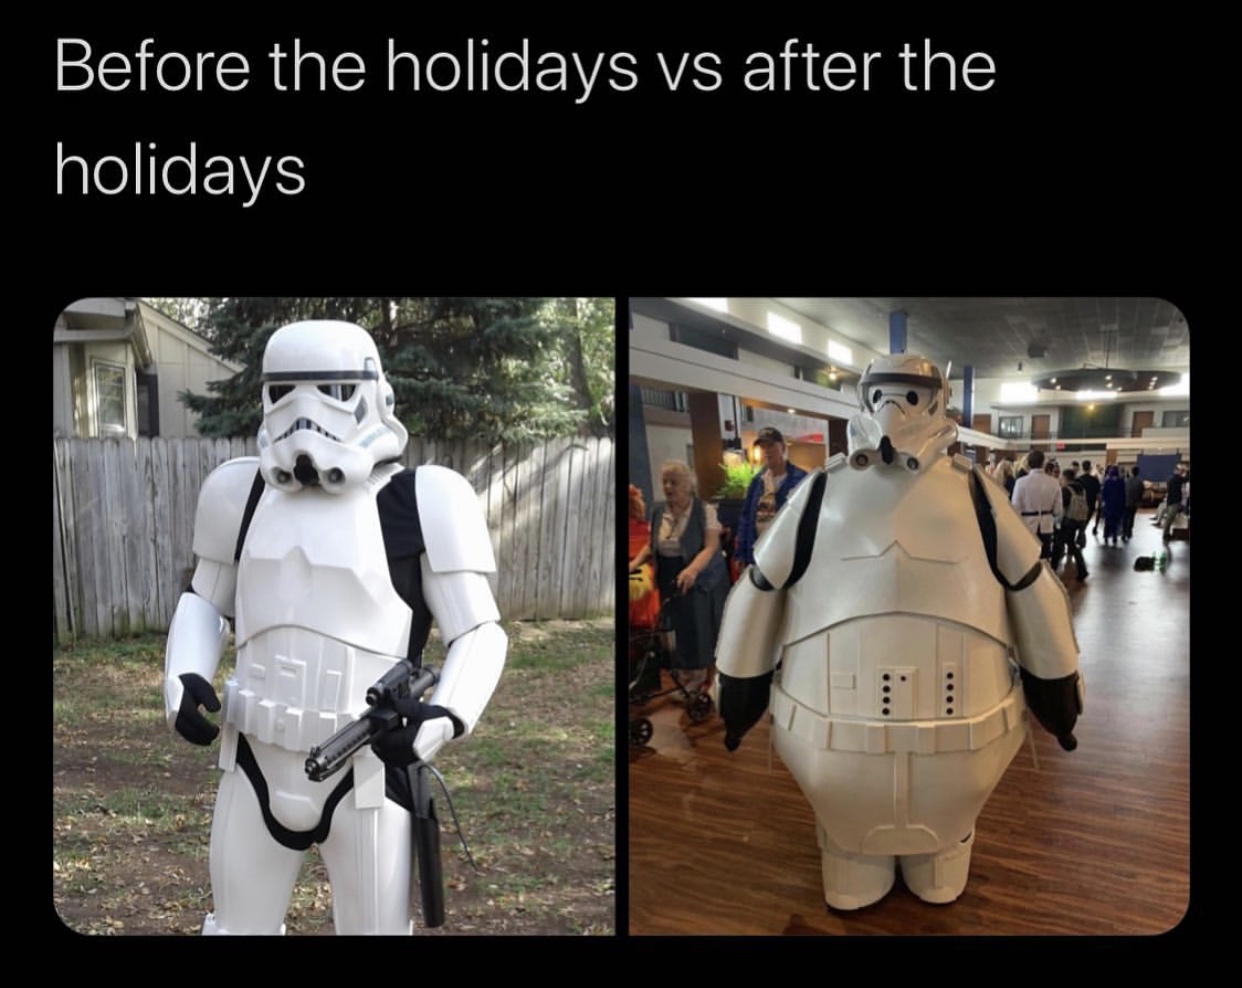 premier holidays - Before the holidays vs after the holidays